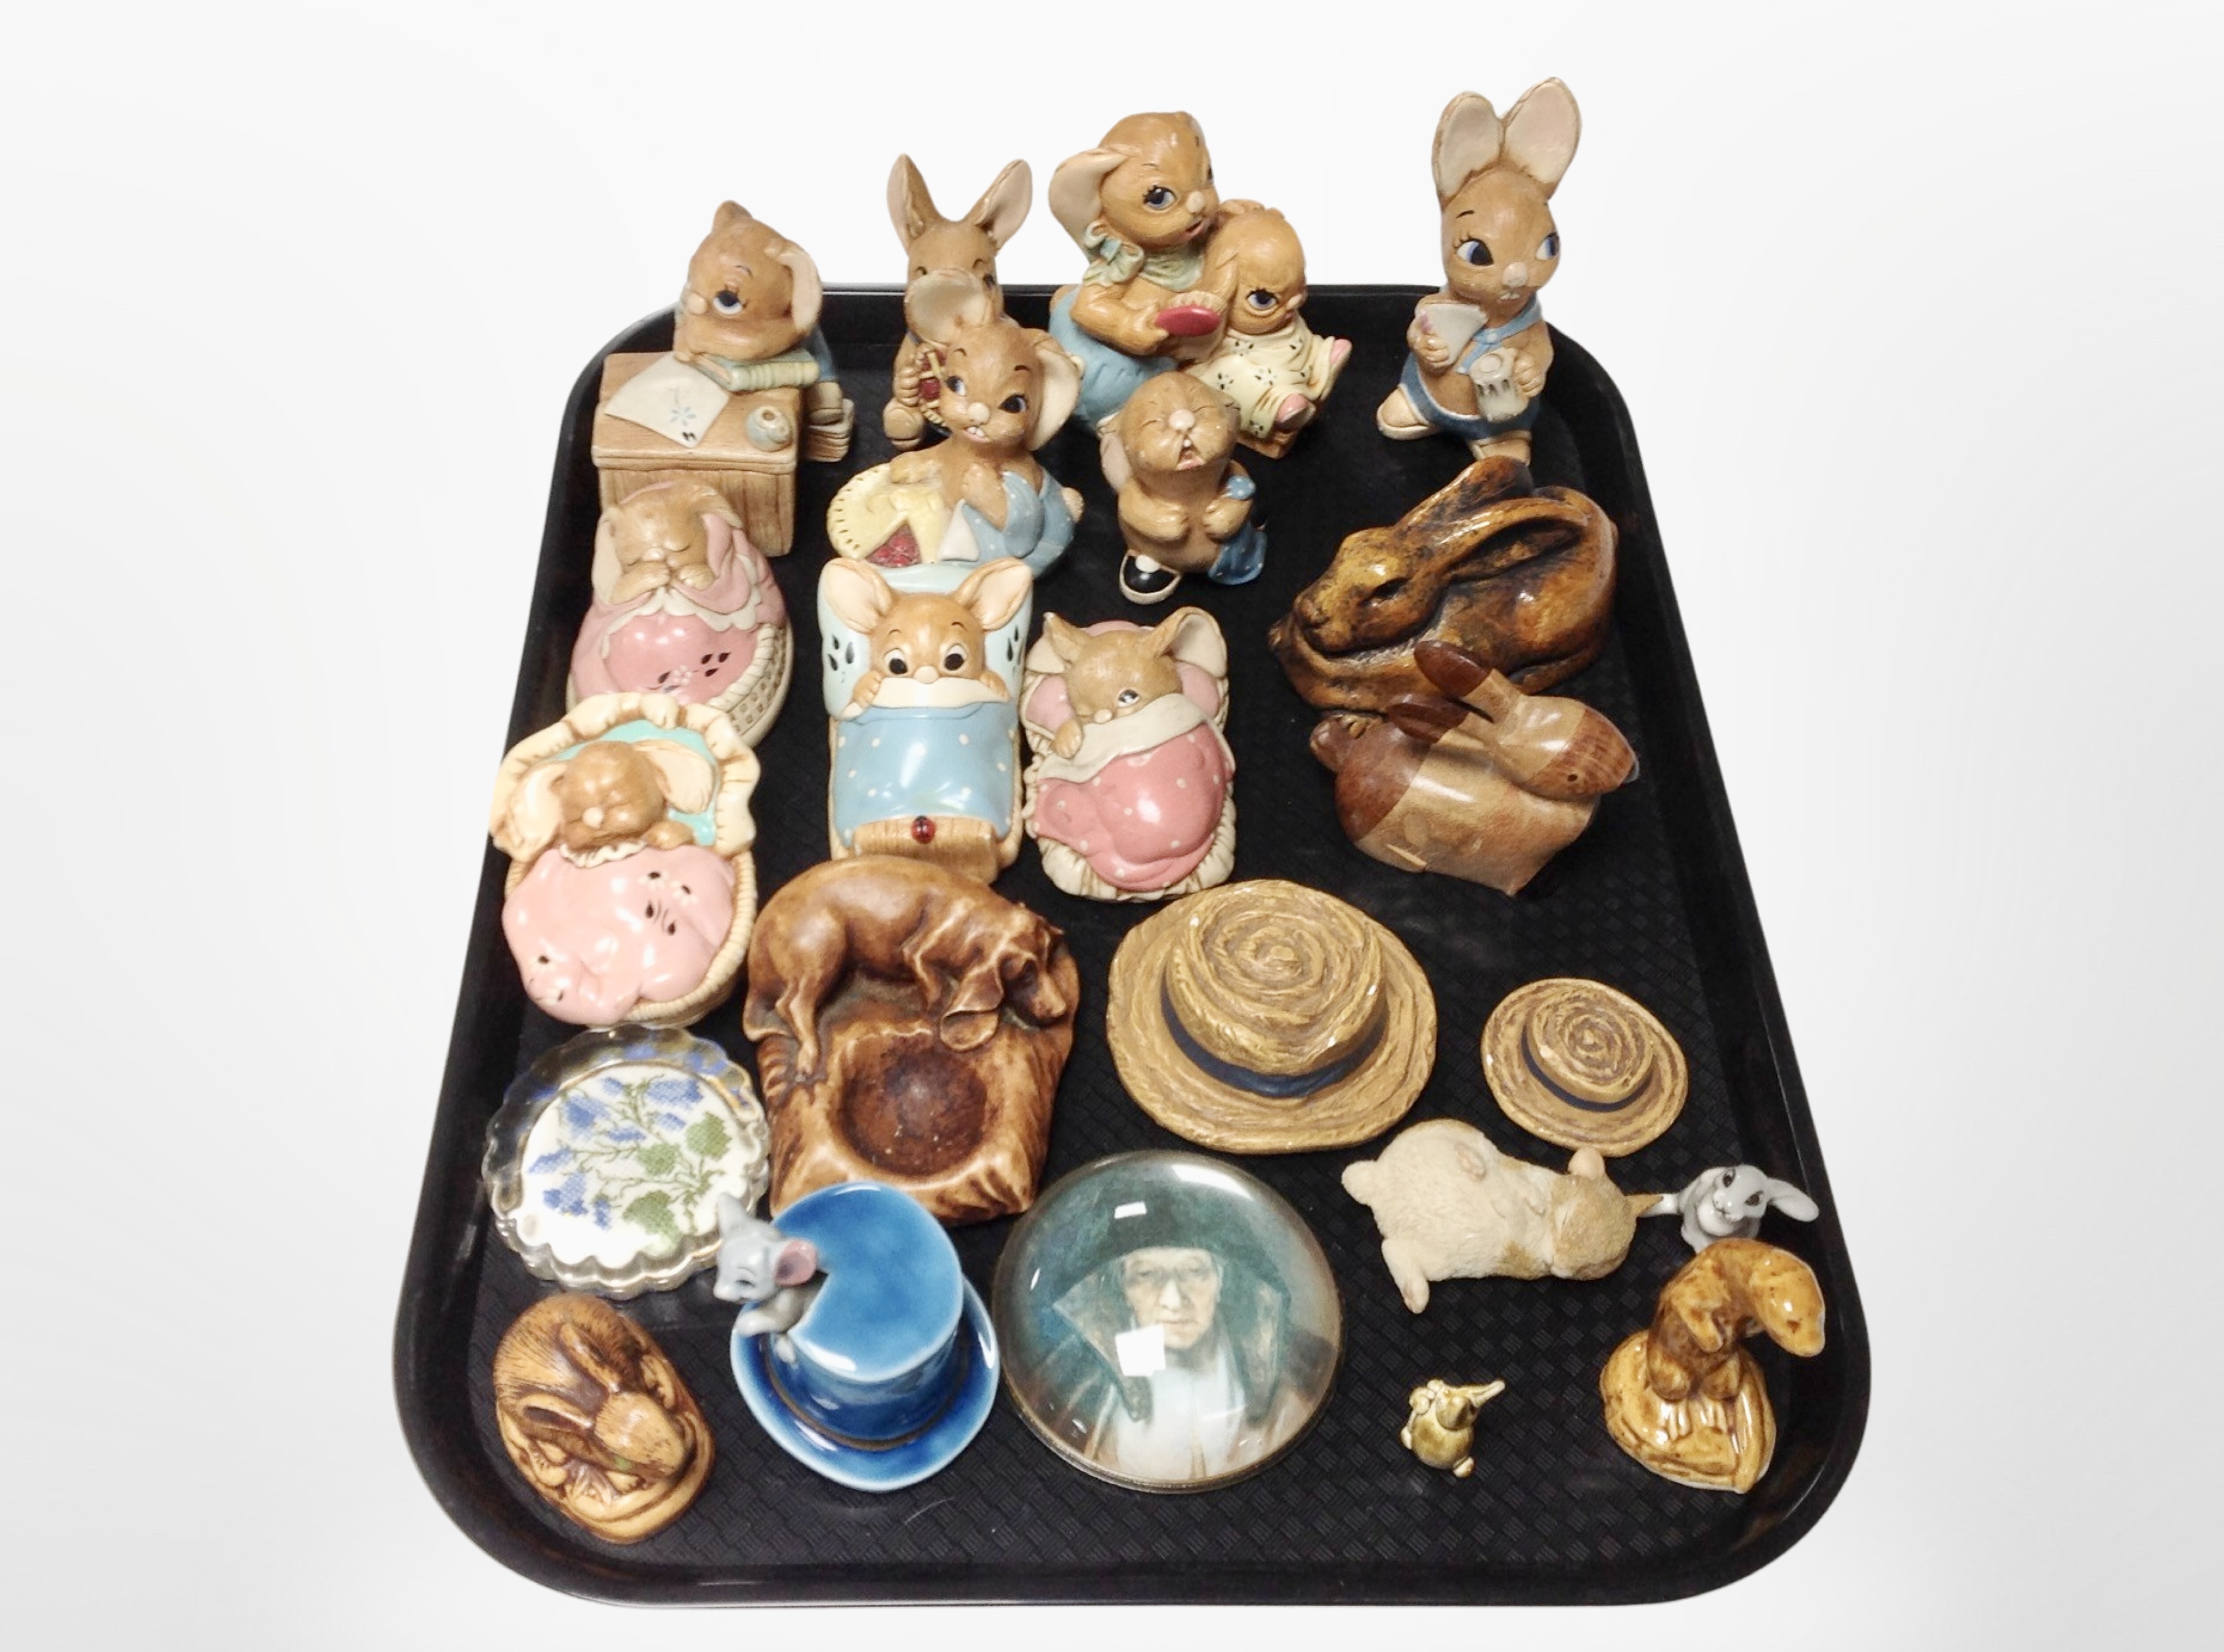 A group of Pendelfin ornaments, Wade whimsies, etc.